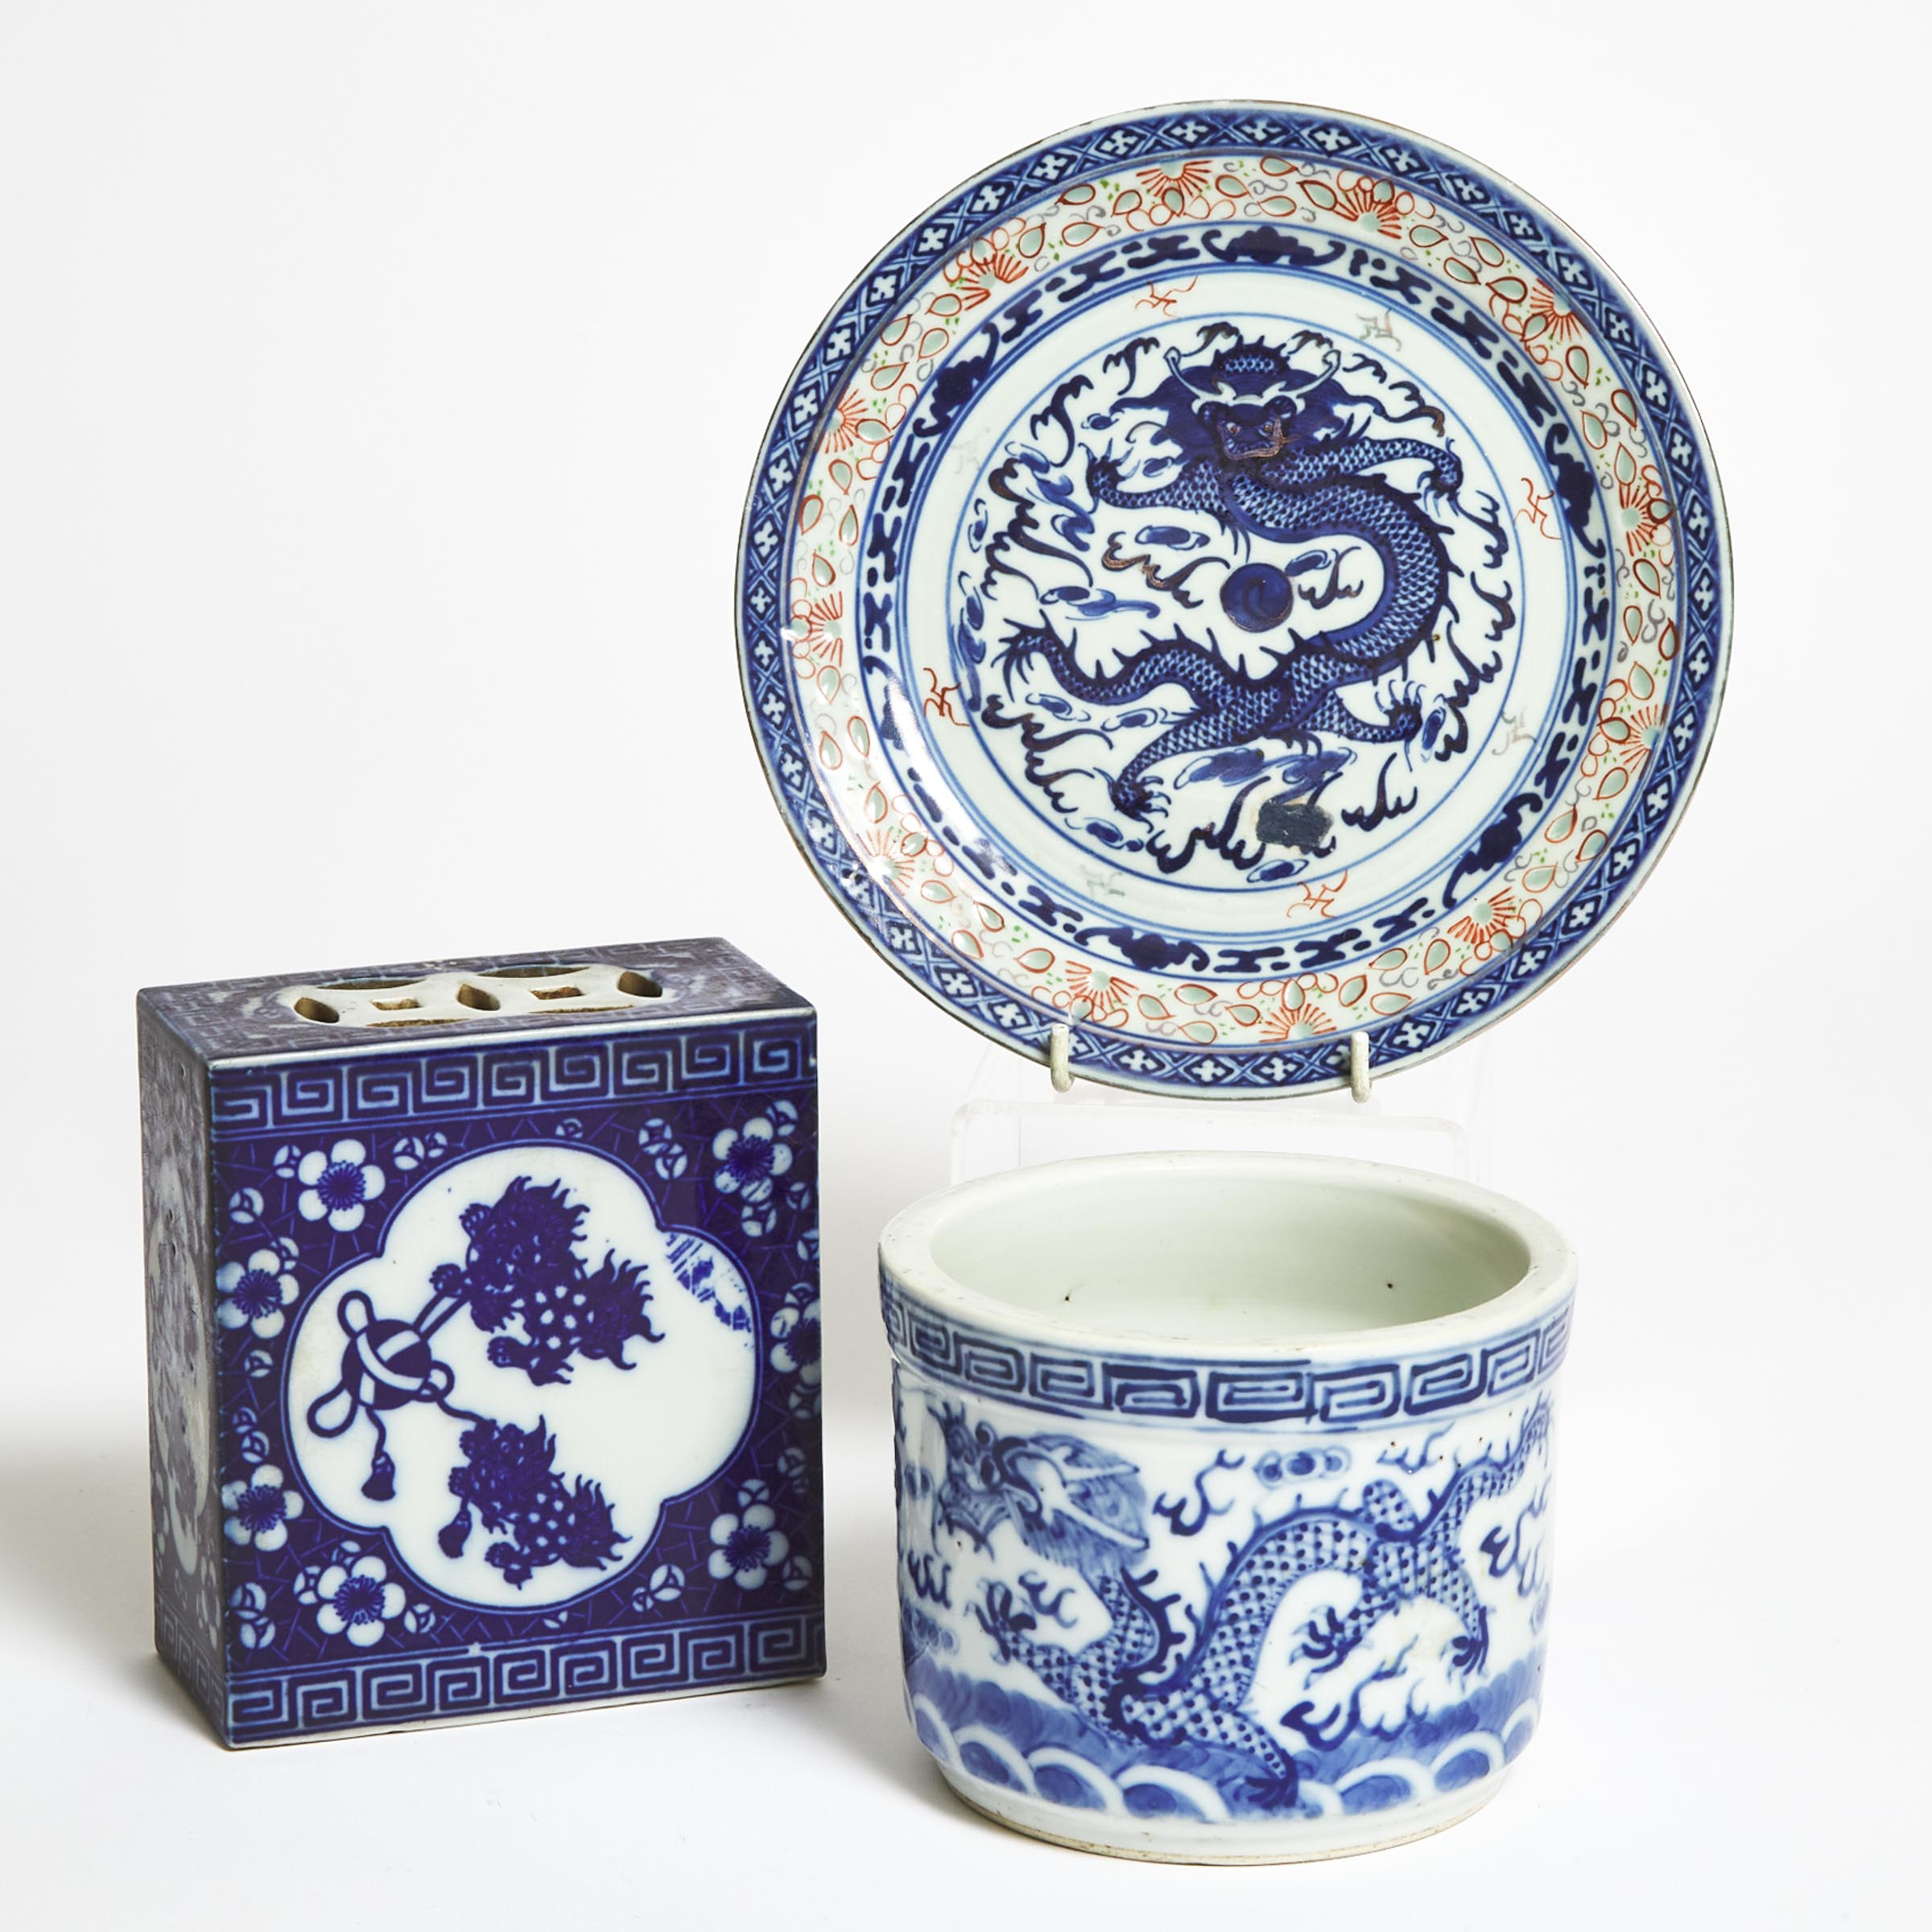 A Group of Three Blue and White Porcelain Wares, Republican Period (1912-1949)